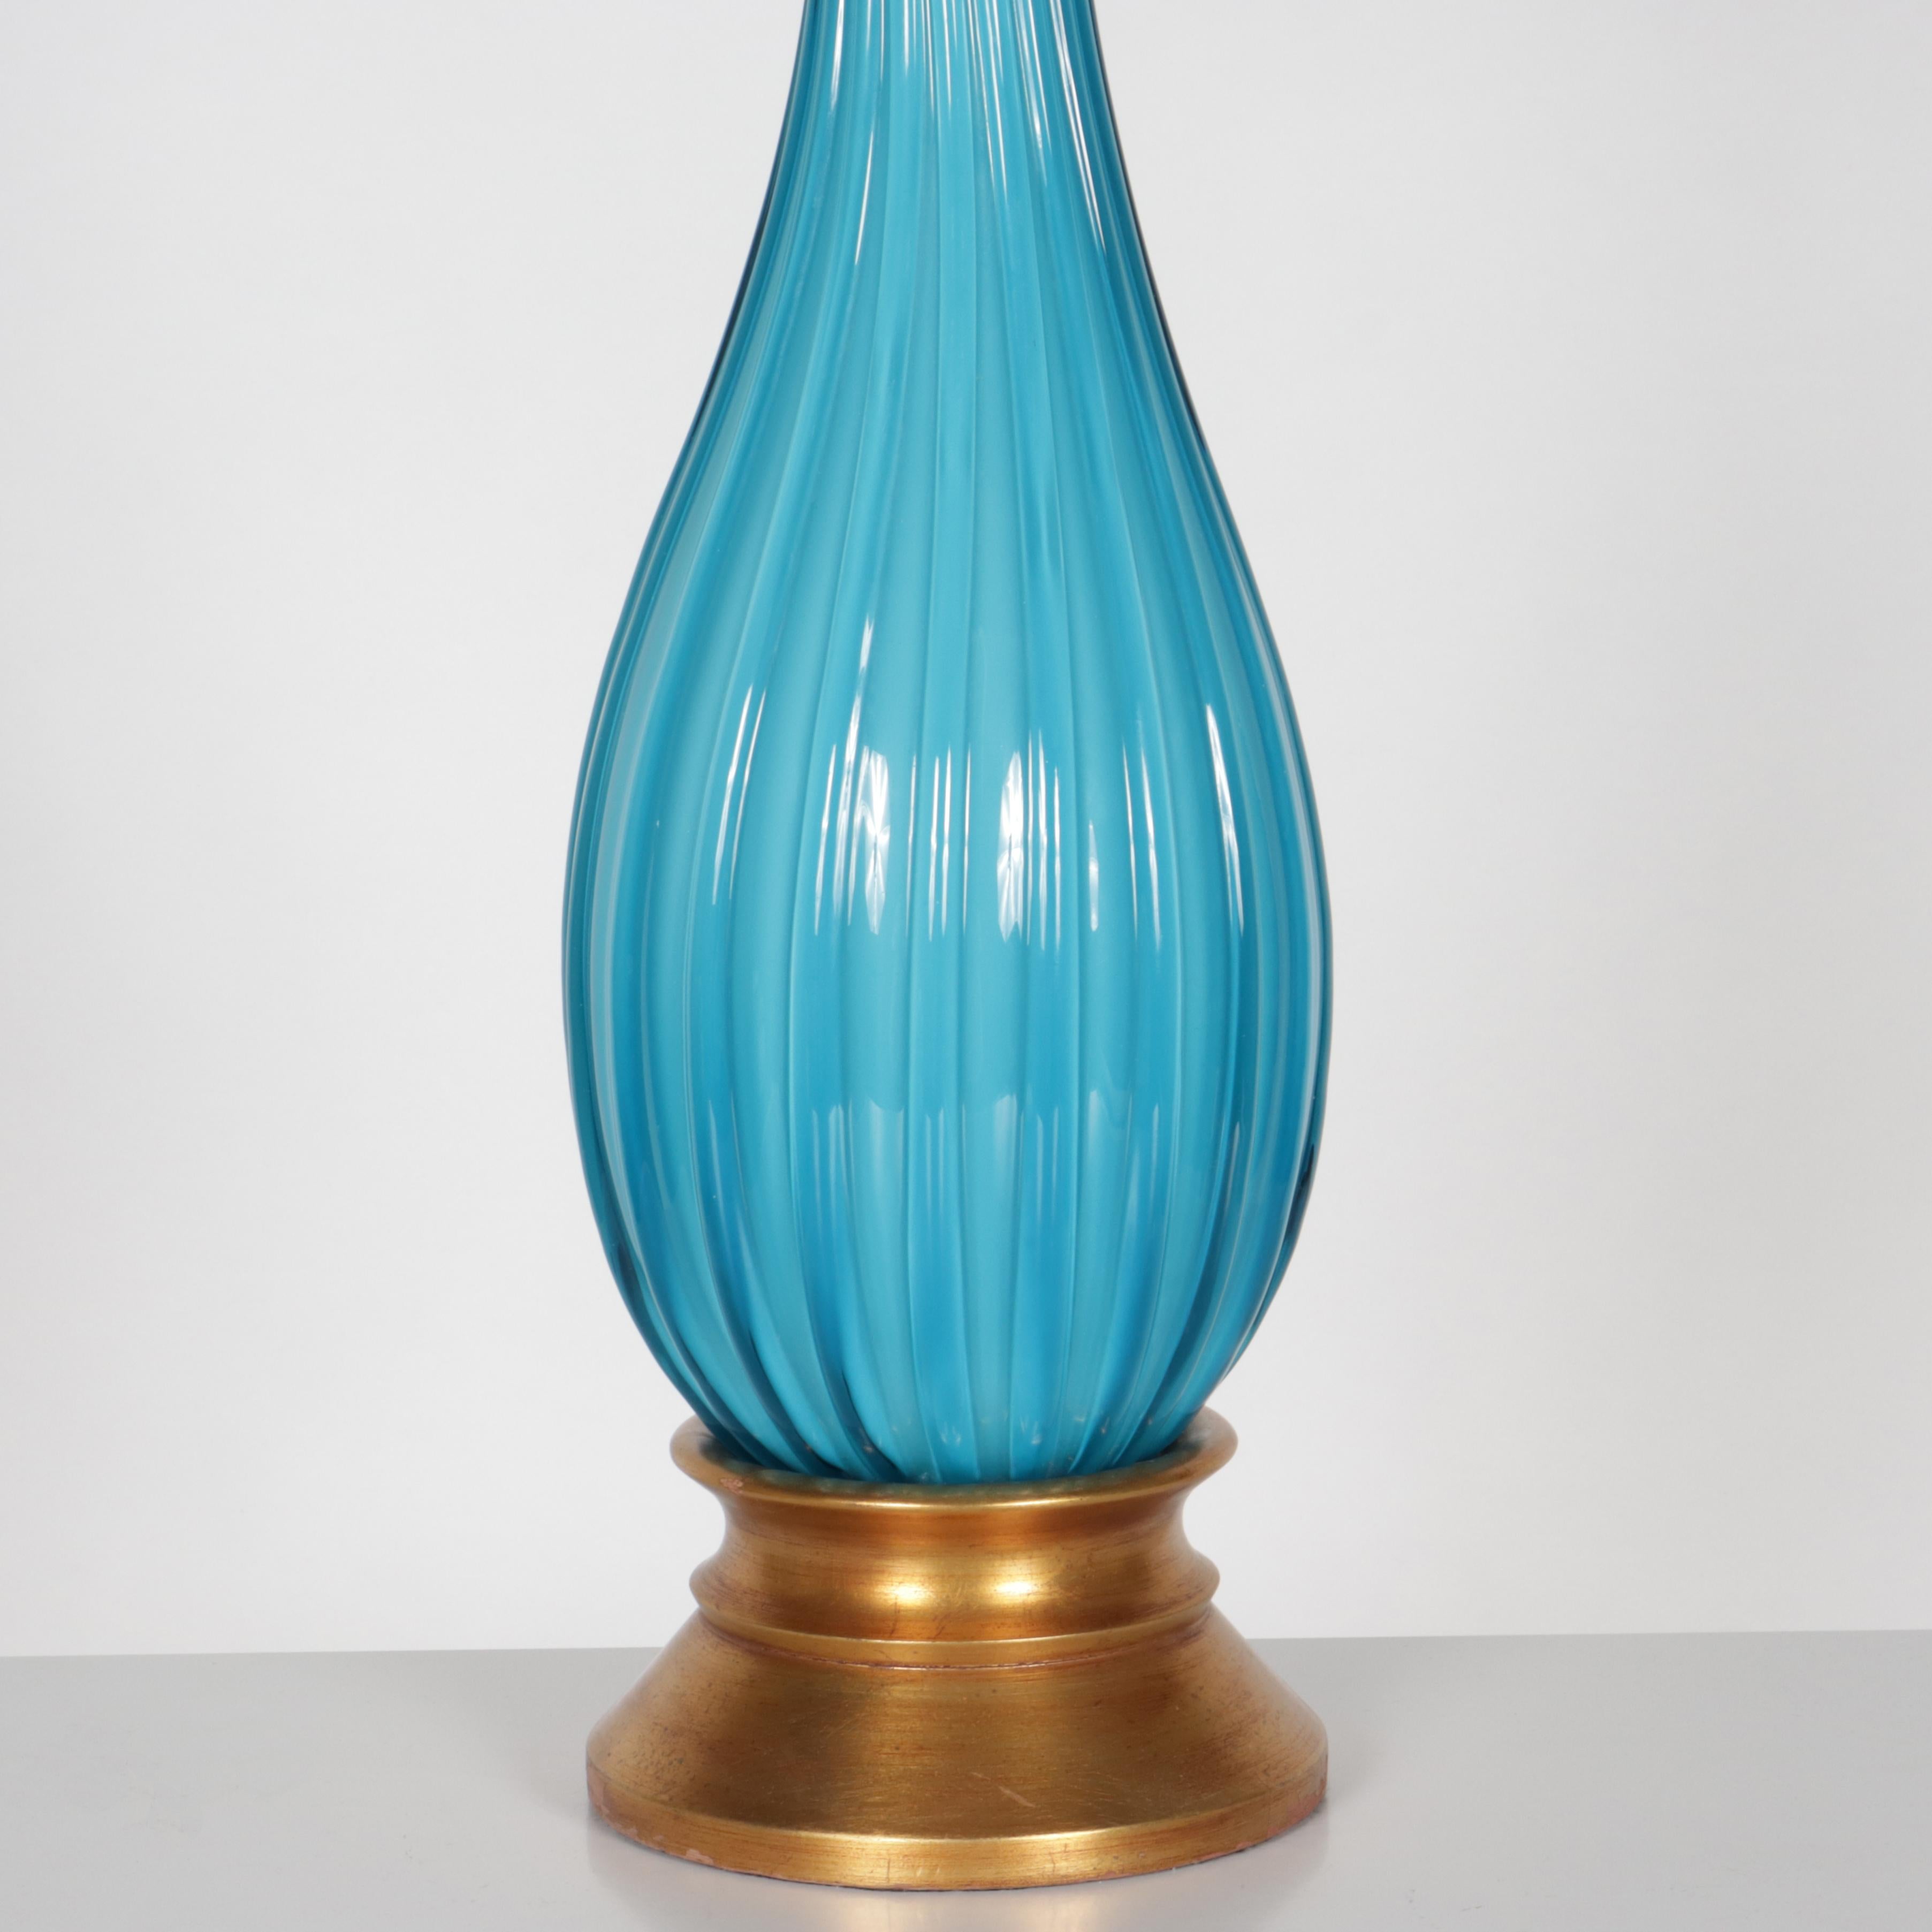 Mid-20th Century Blue Murano Glass Lamp Attributed to Hollywood Regency, c. 1950 For Sale